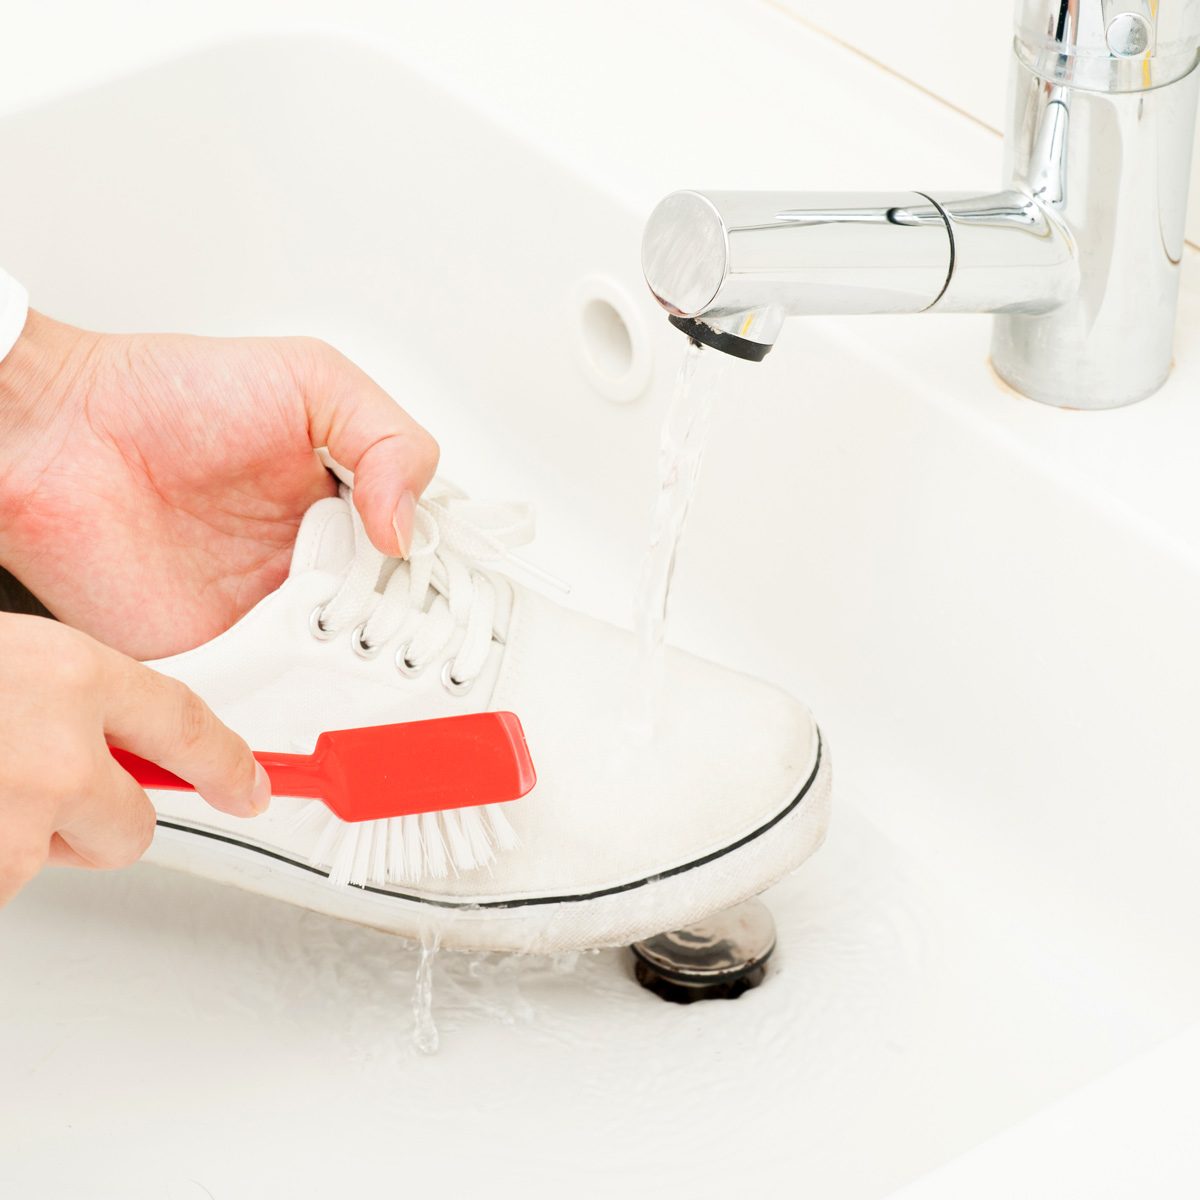 ad How to clean your white sneakers using @OxiClean White Revive 👟🧼, Cleaning White Sneakers